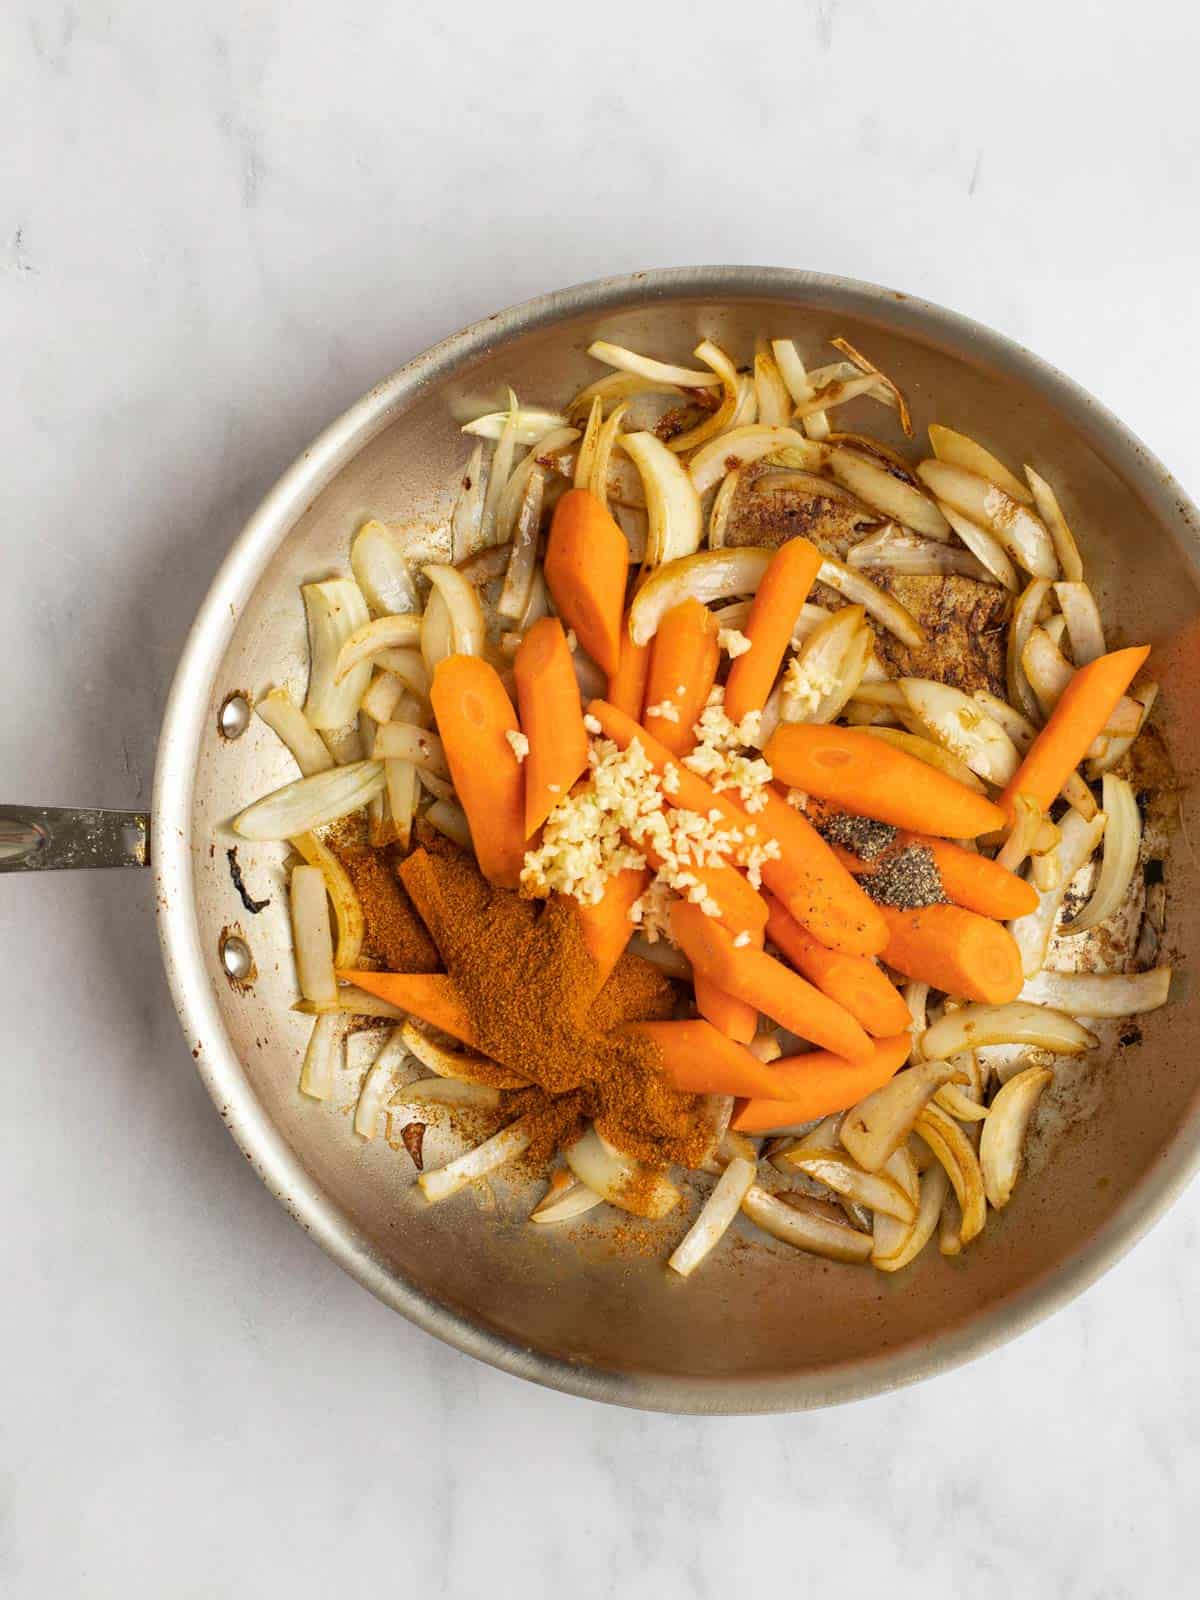 Sautéed onion in a pan with carrots, garlic, and spices.